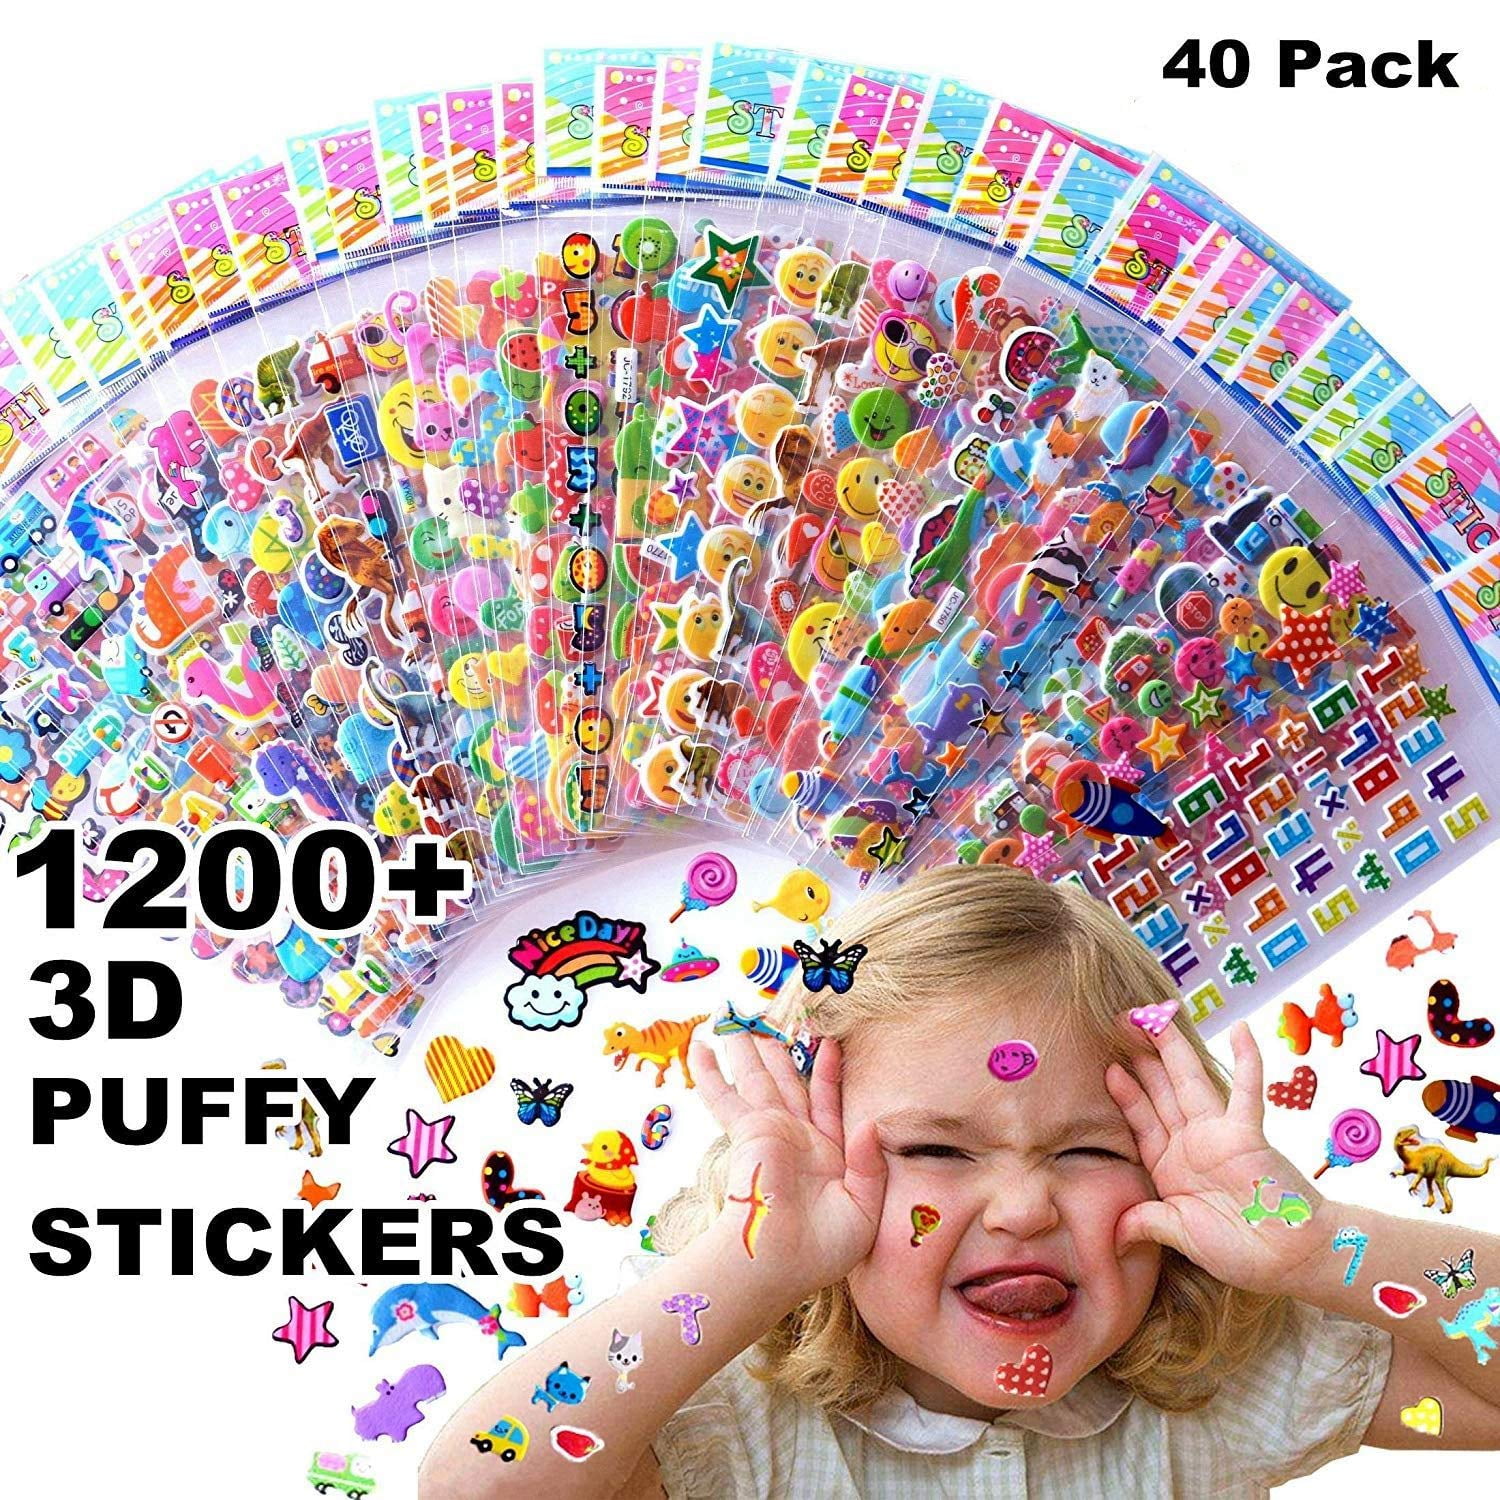 Scrap Books 3D Puffy Stickers， for Children，Kids Stickers for Birthday Party Gifts Scrapbooking DIY Crafts，Small Sheets of Kids Stickers for Craft Gift Party Bags Card Making